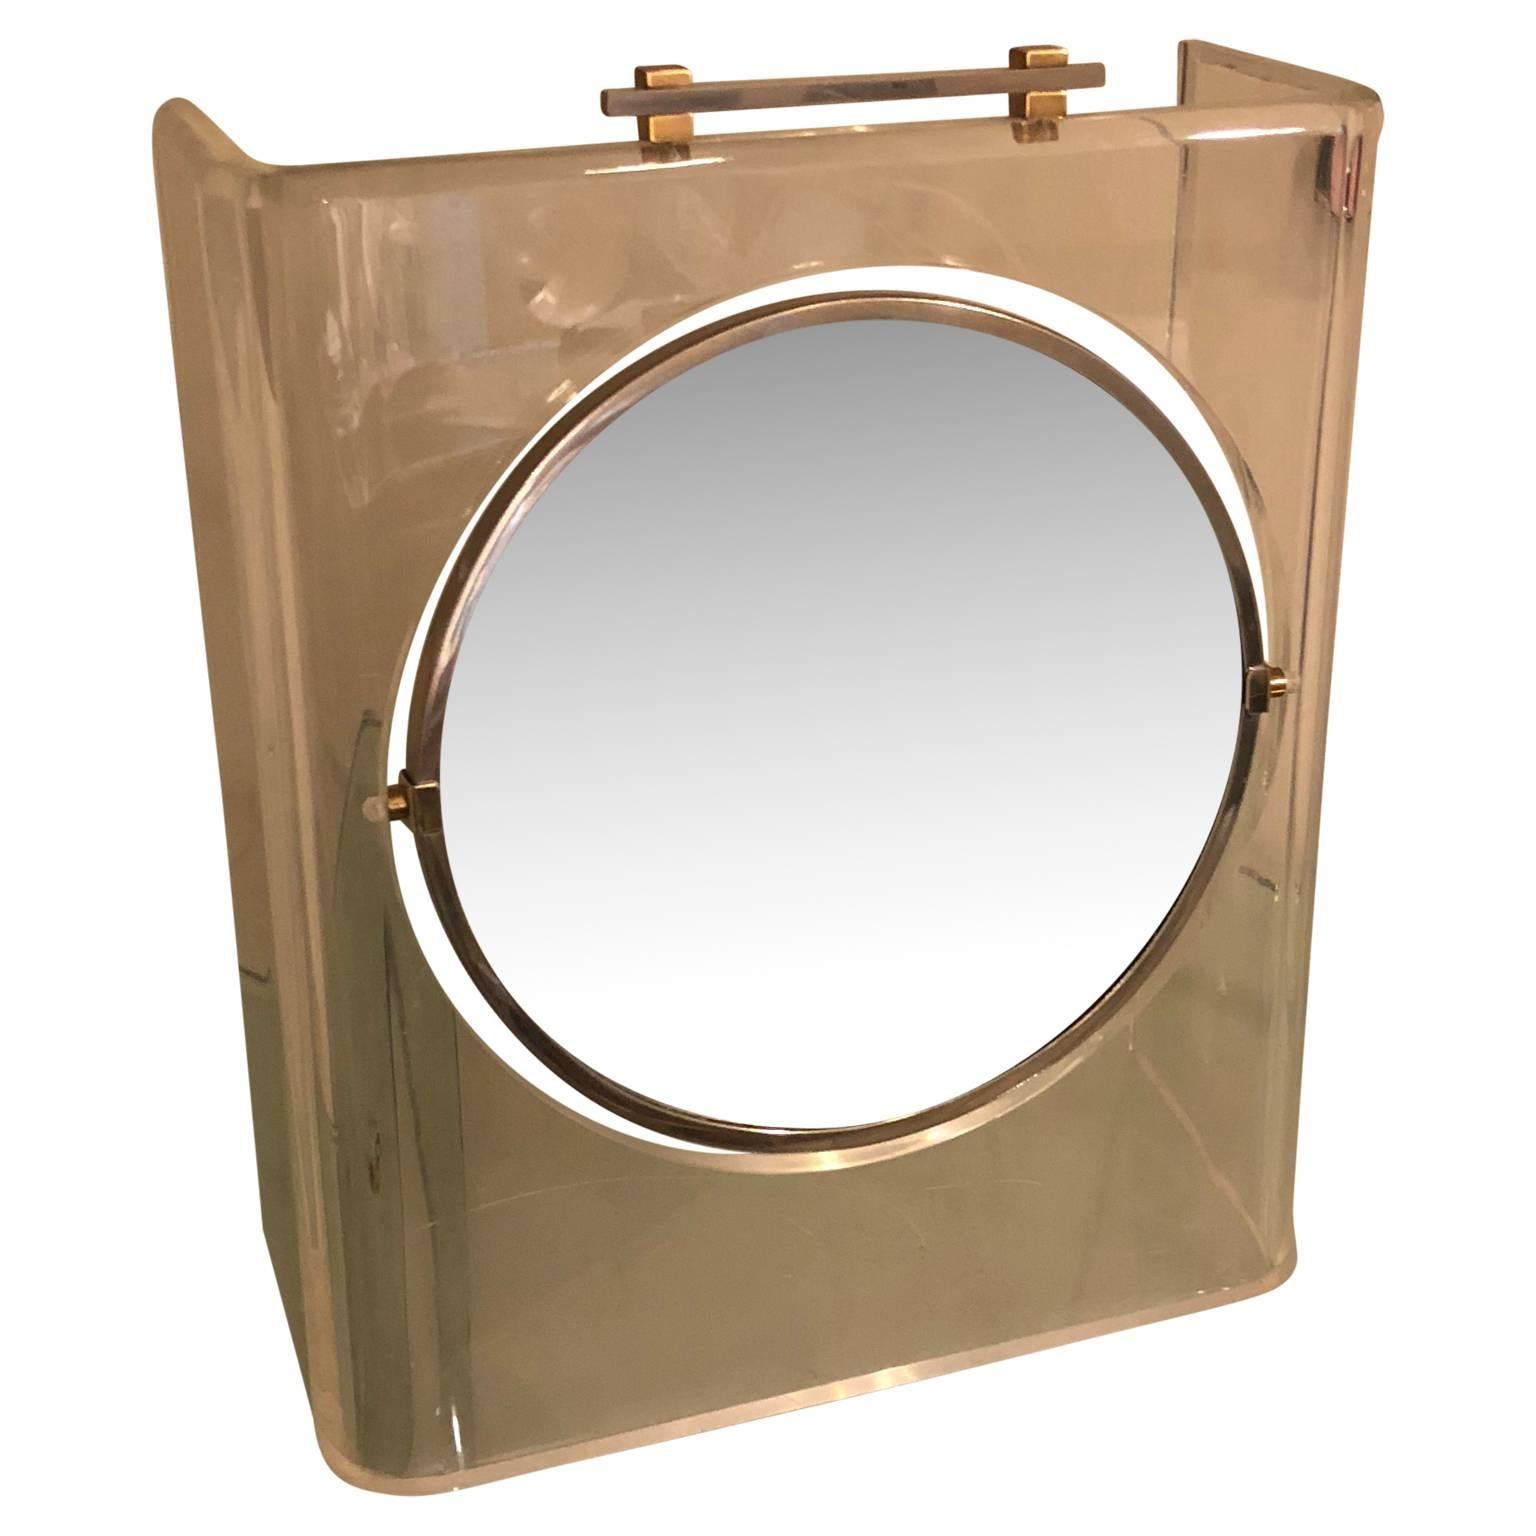 Italian Mid-Century Modern Lucite Chrome and Brass Vanity Table Mirror In Good Condition For Sale In Haddonfield, NJ